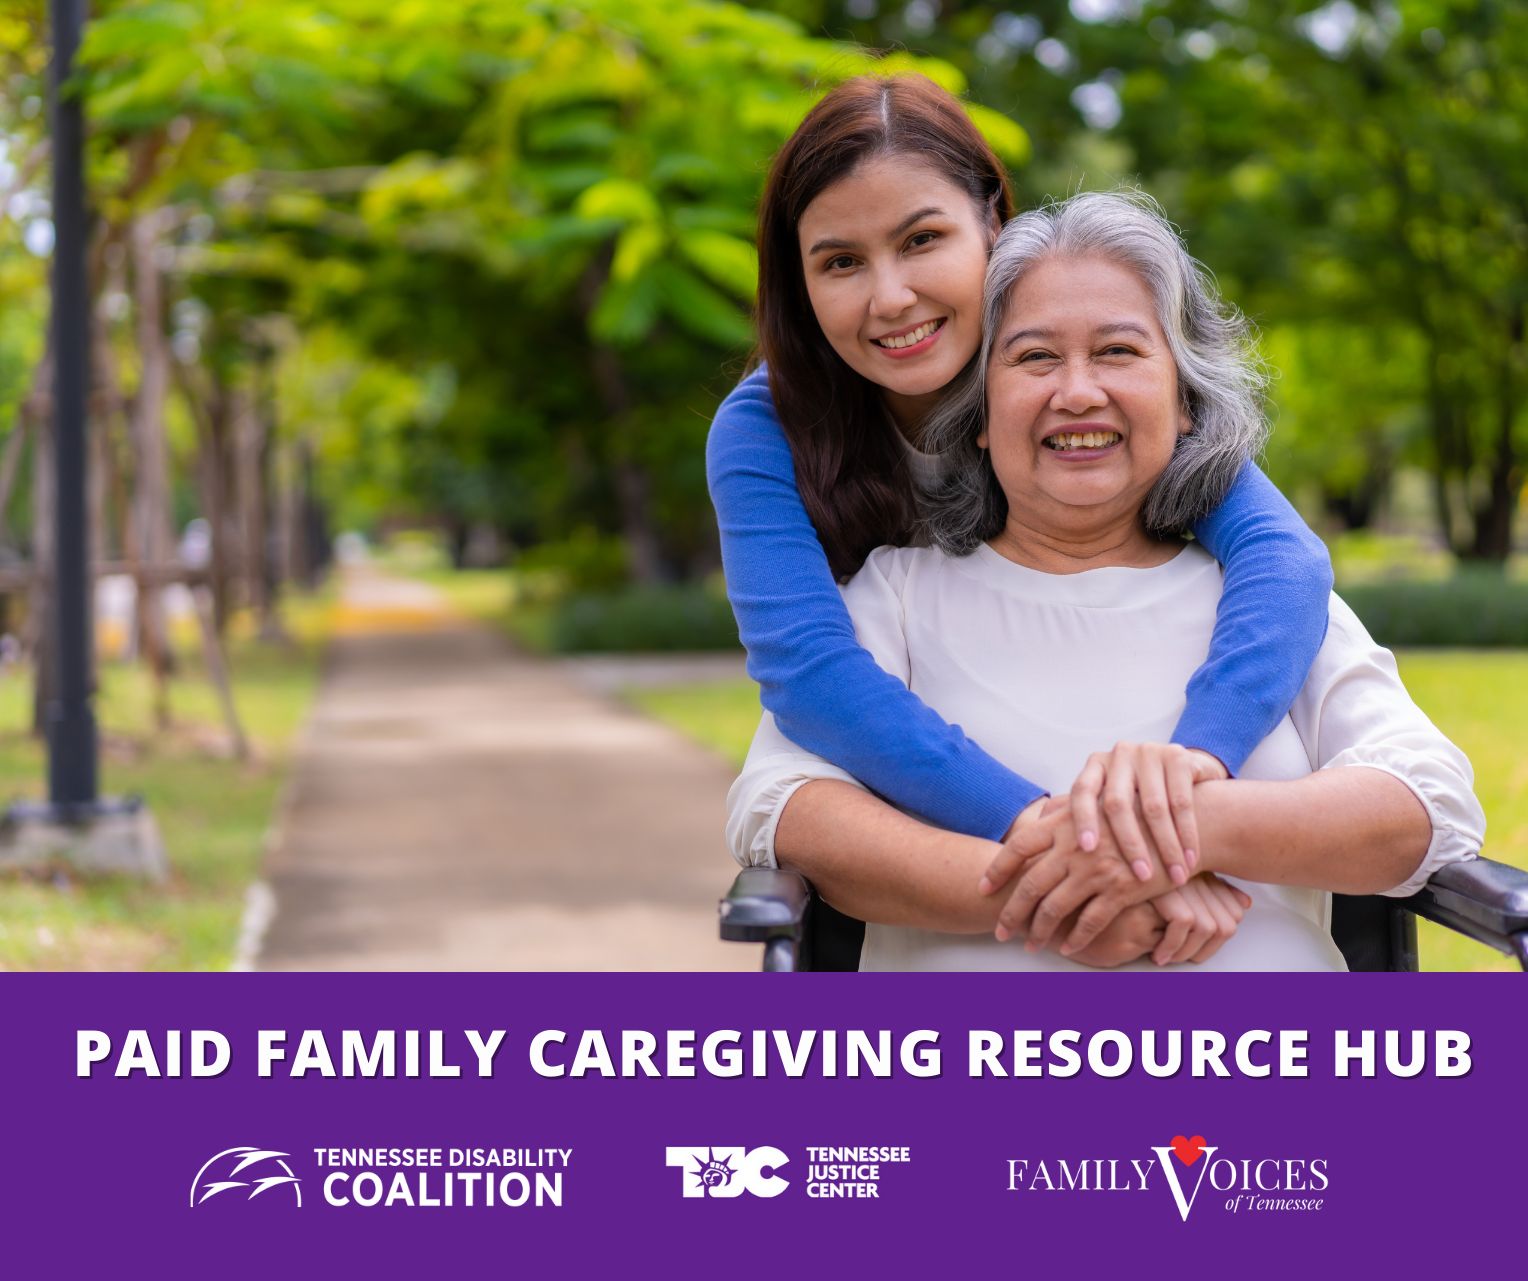 a middle-aged woman standing behind and hugging an older woman who is using a wheelchair. Text reads "Paid Family Caregiving Resource Hub"